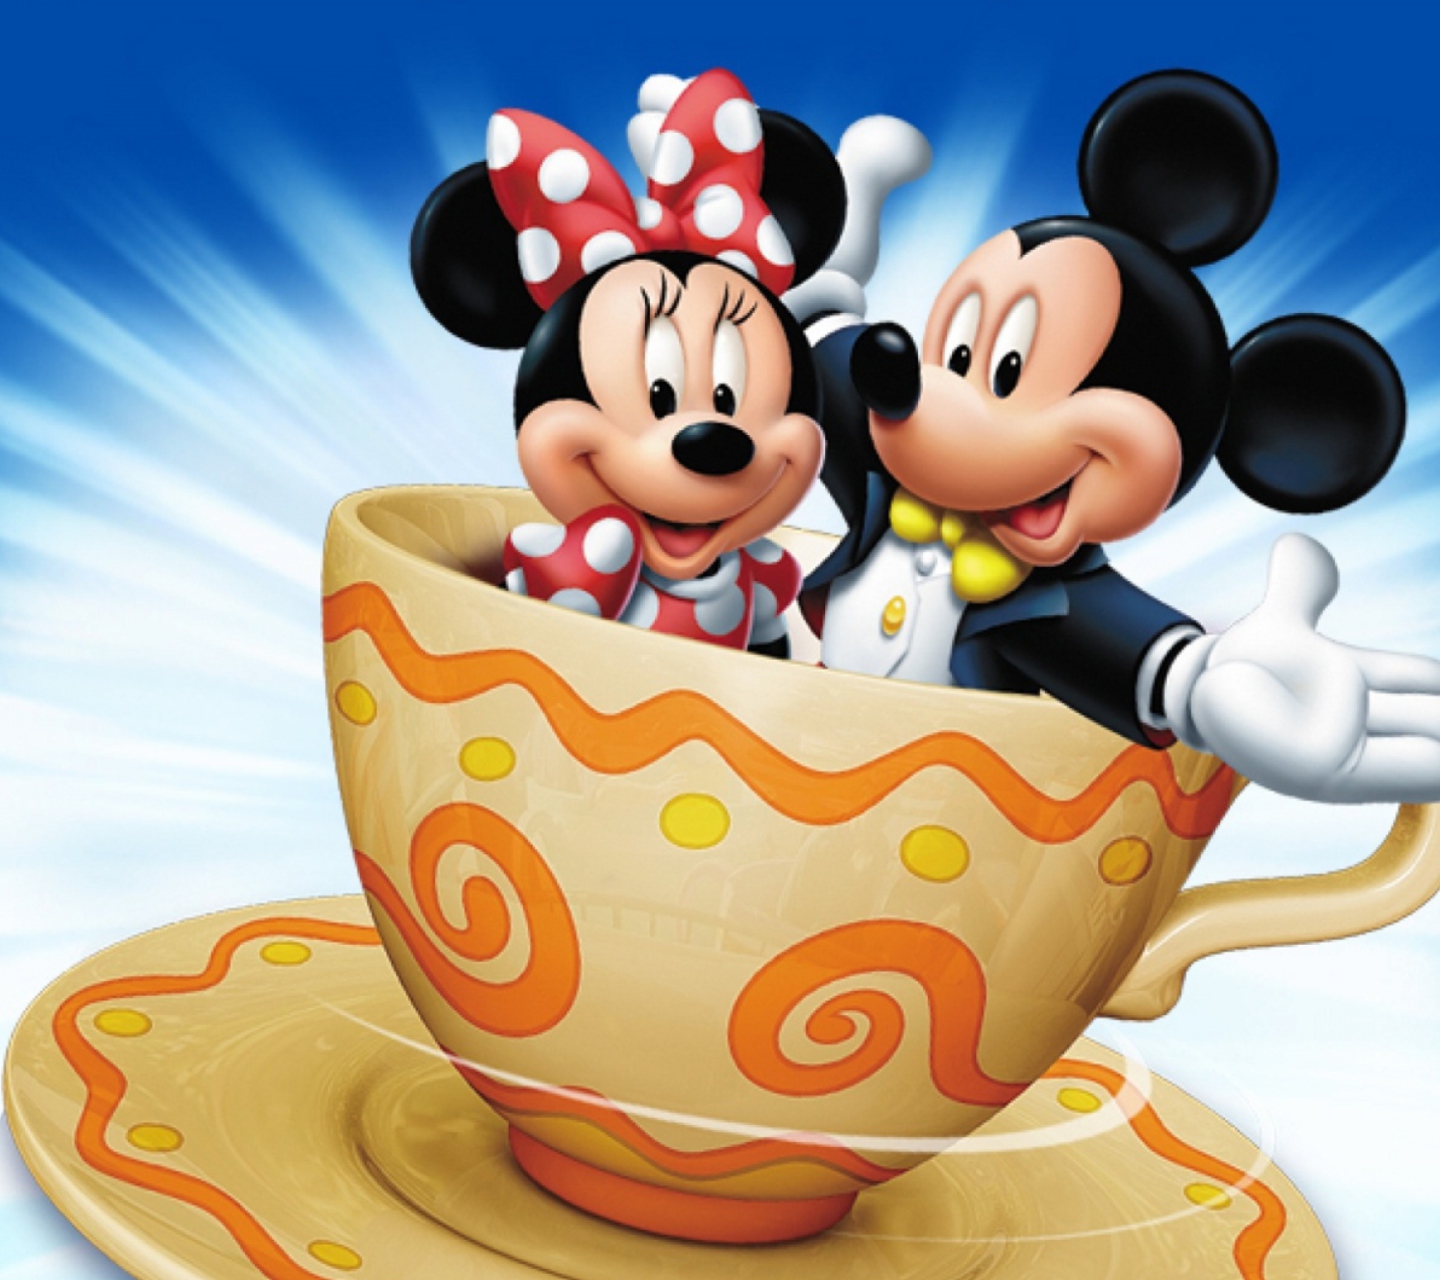 Mickey And Minnie Mouse In Cup wallpaper 1440x1280